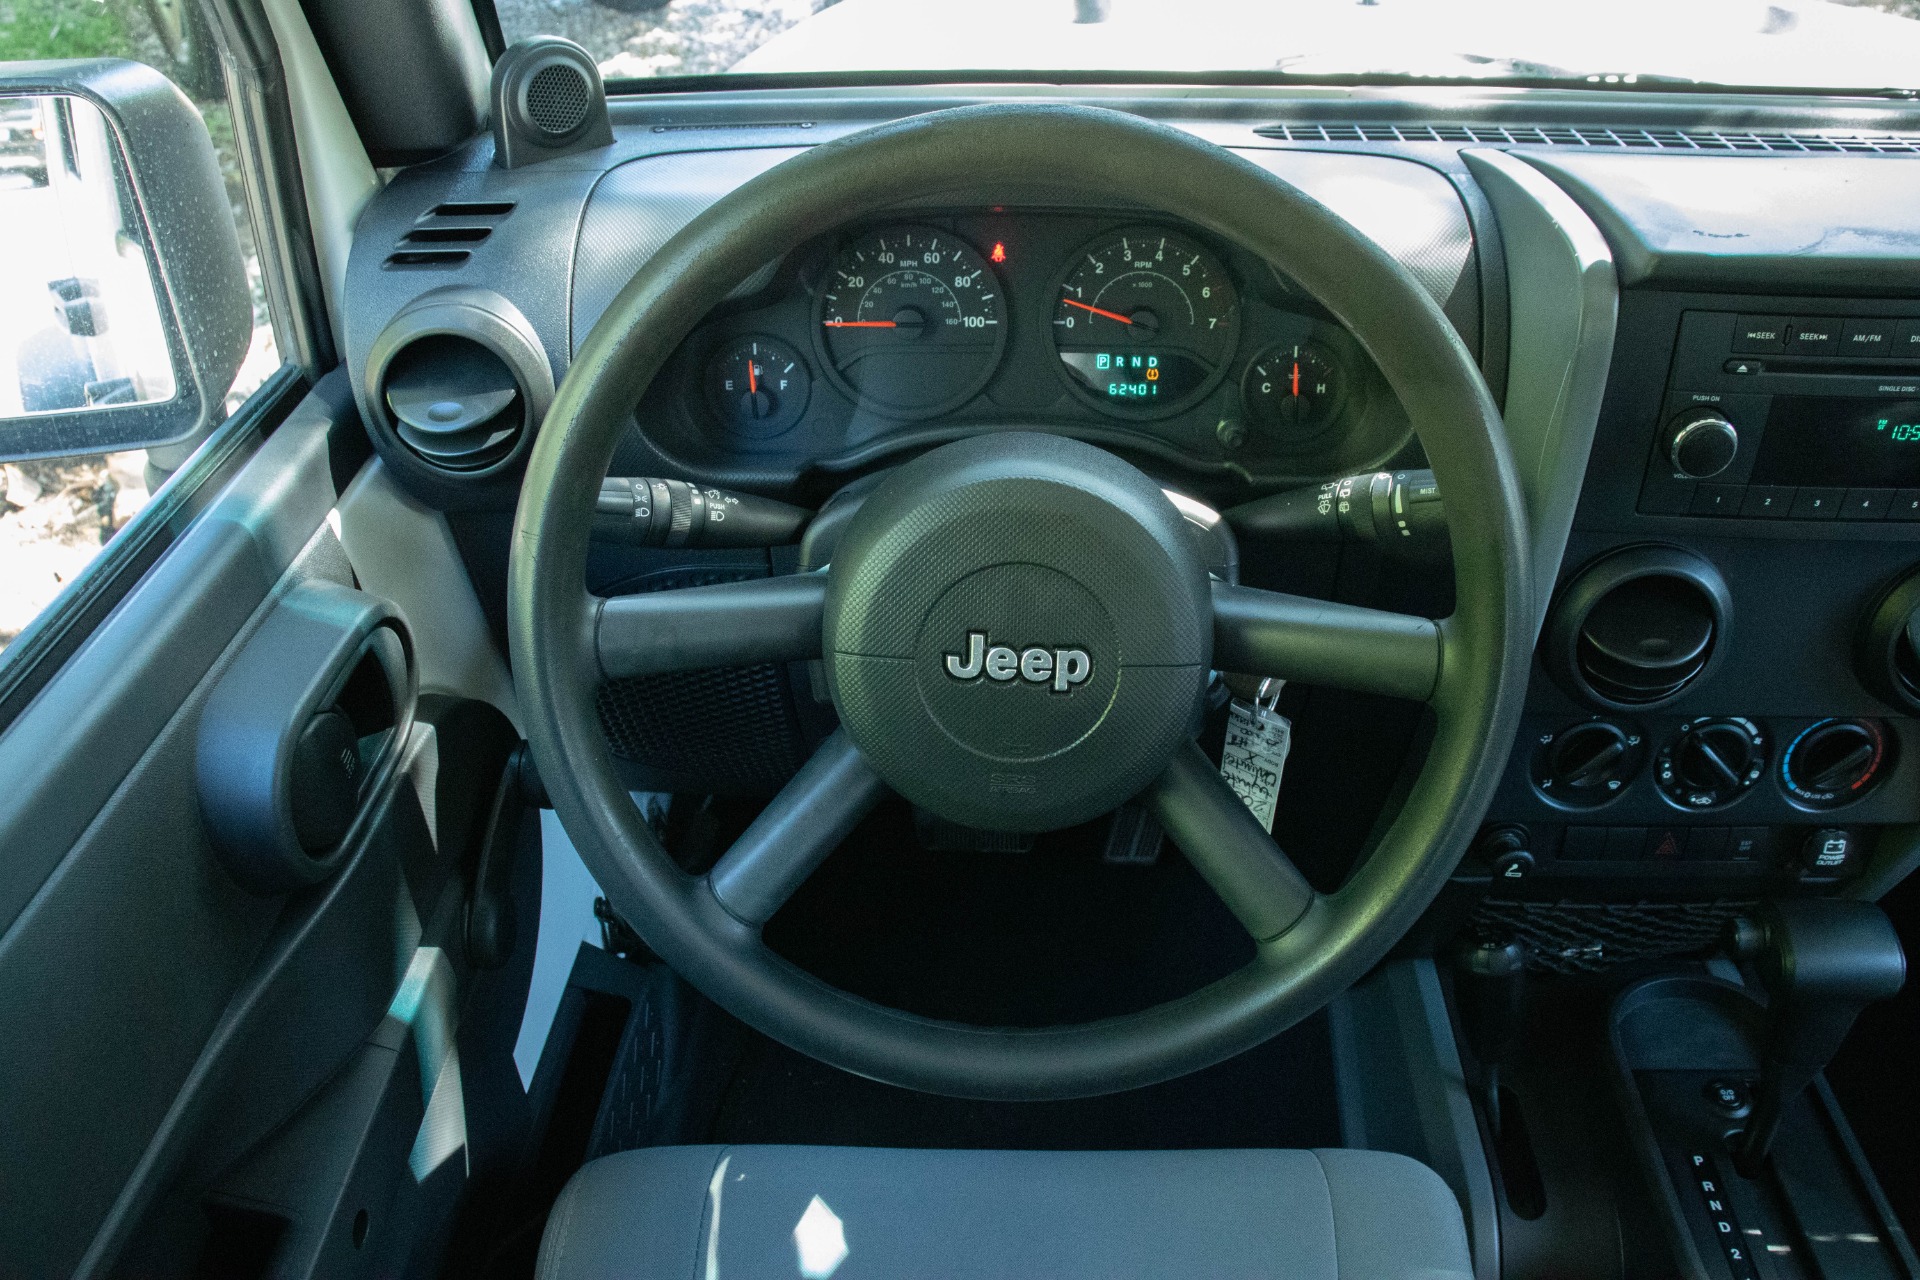 Used 2009 Jeep Wrangler Unlimited X For Sale ($21,995) | Select Jeeps Inc.  Stock #707937